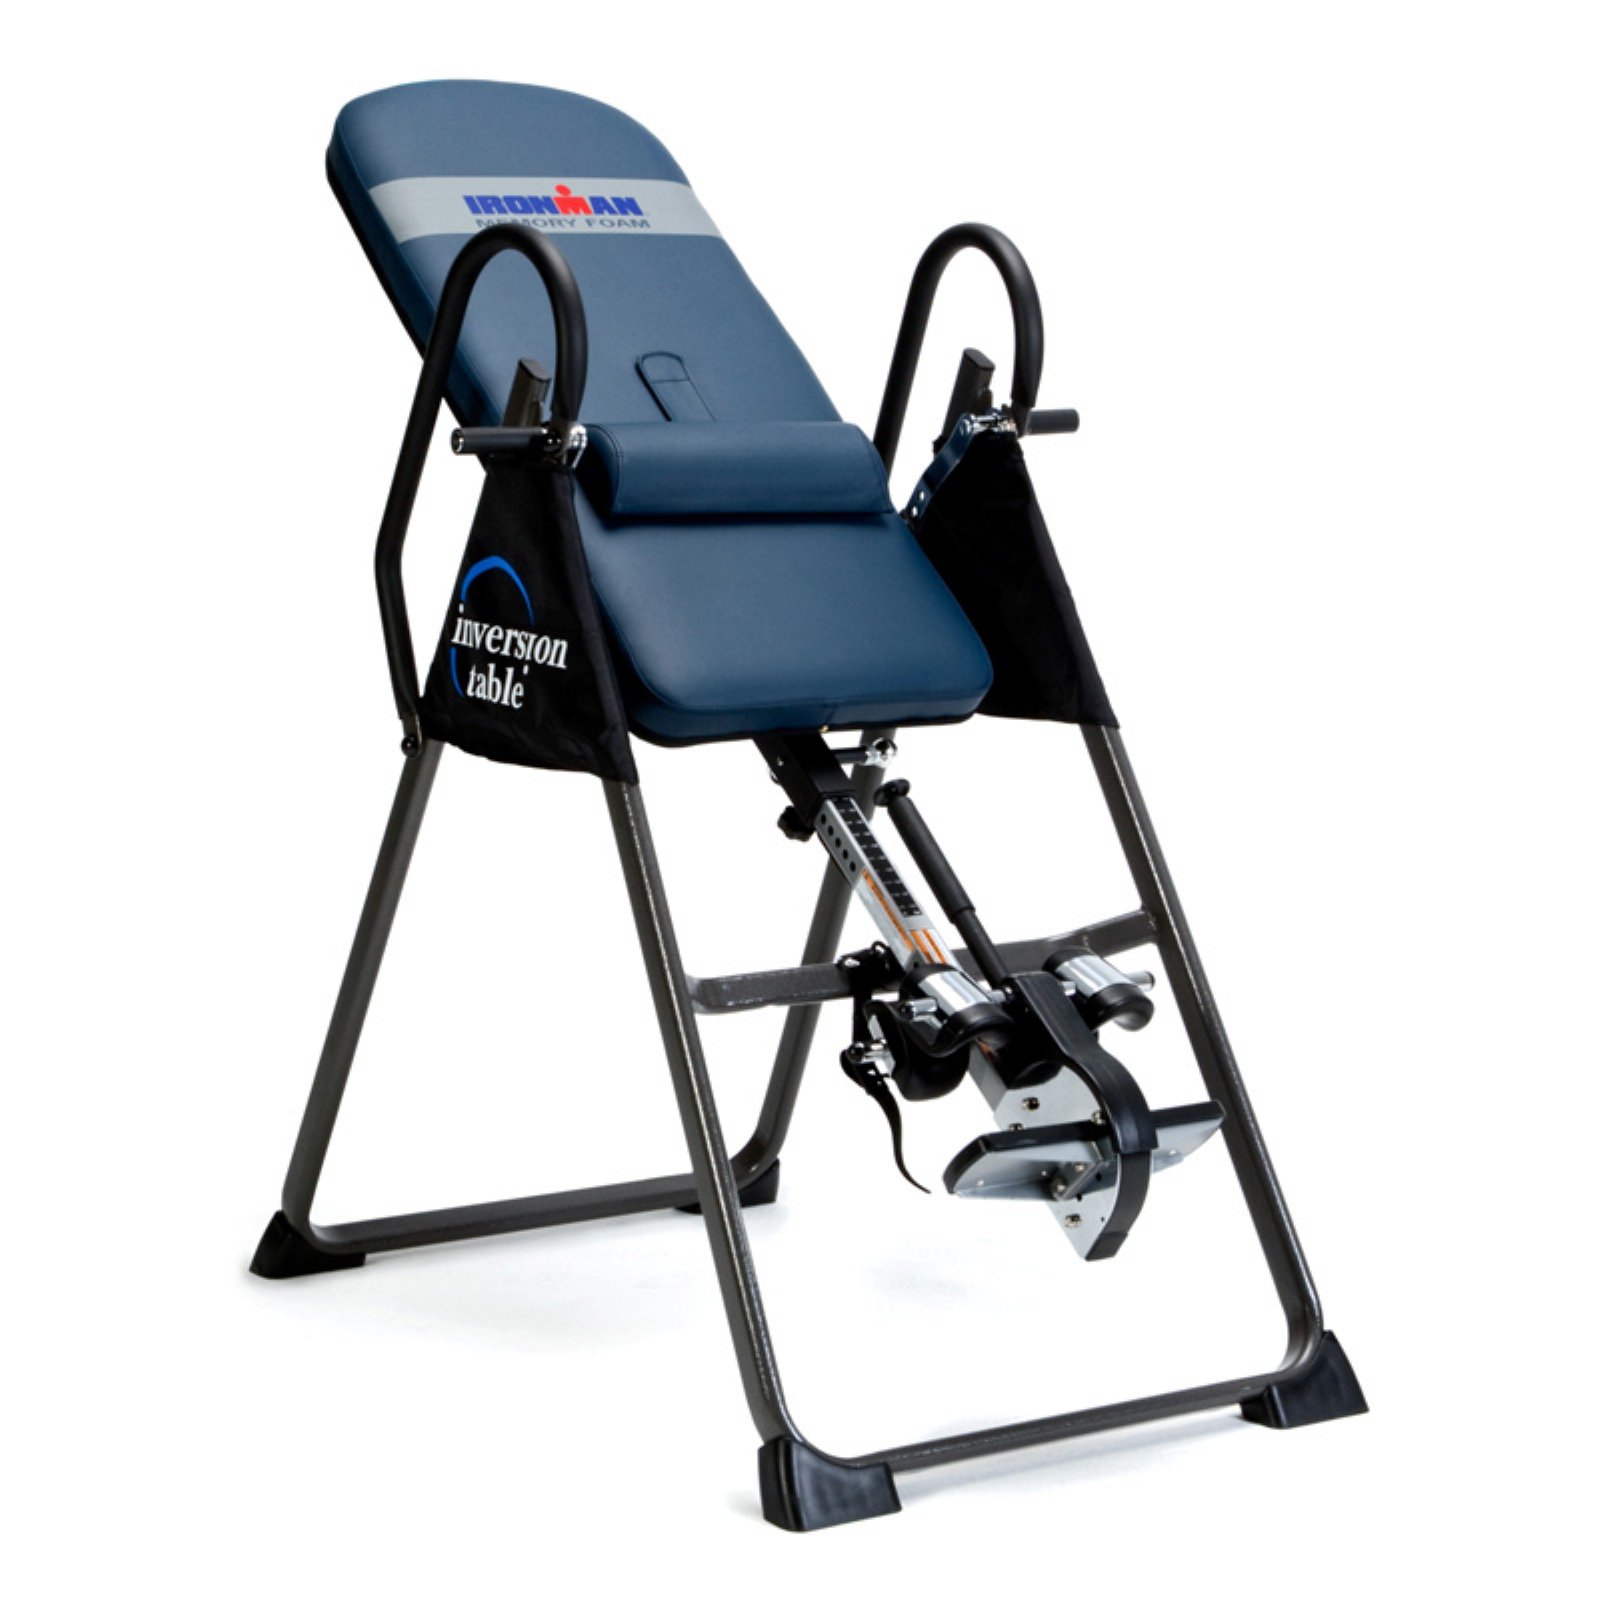 Ironman Fitness Gravity 4000 Highest Weight Capacity Inversion Table - image 1 of 6